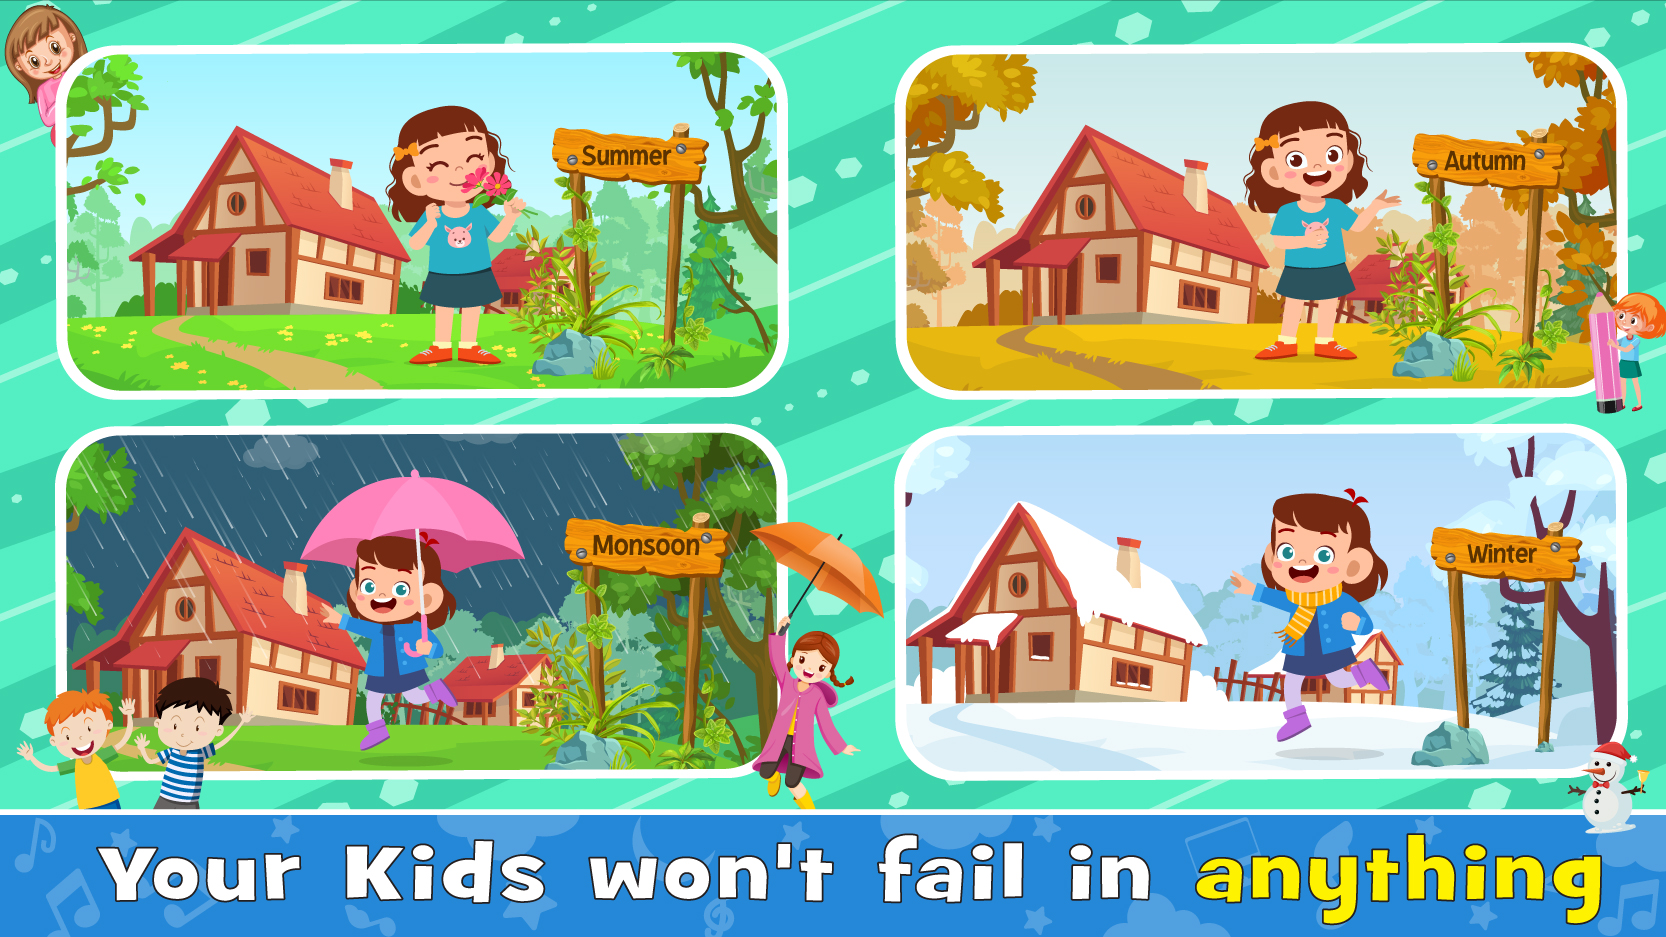 Kids Games to Learn English